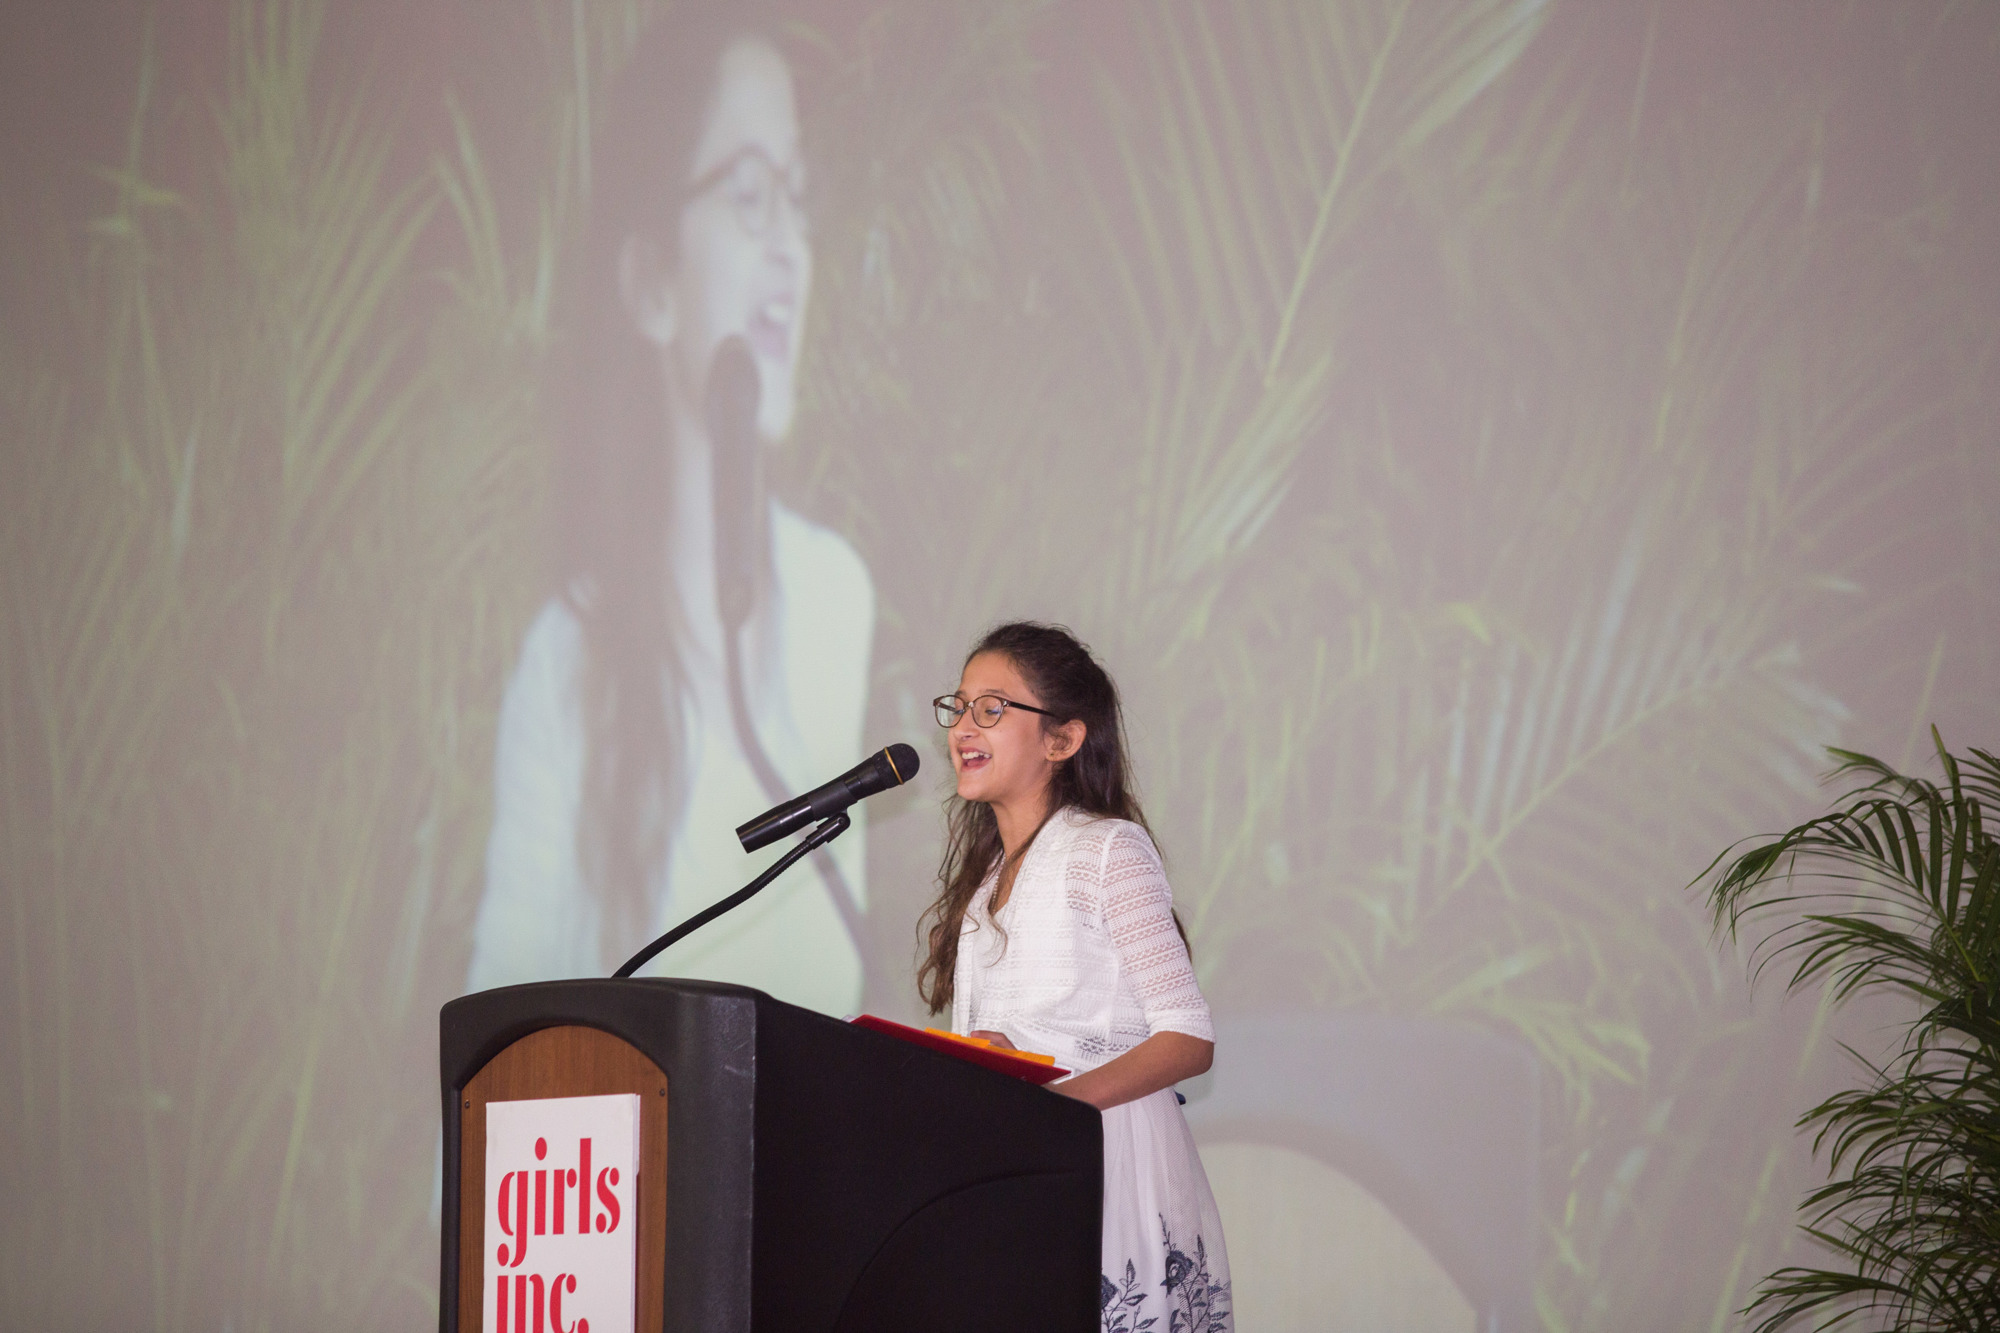 Tylee Giorgio gives a speech before accepting her She Know's Where She's Growing Award at the Girls Inc. Celebration Luncheon.